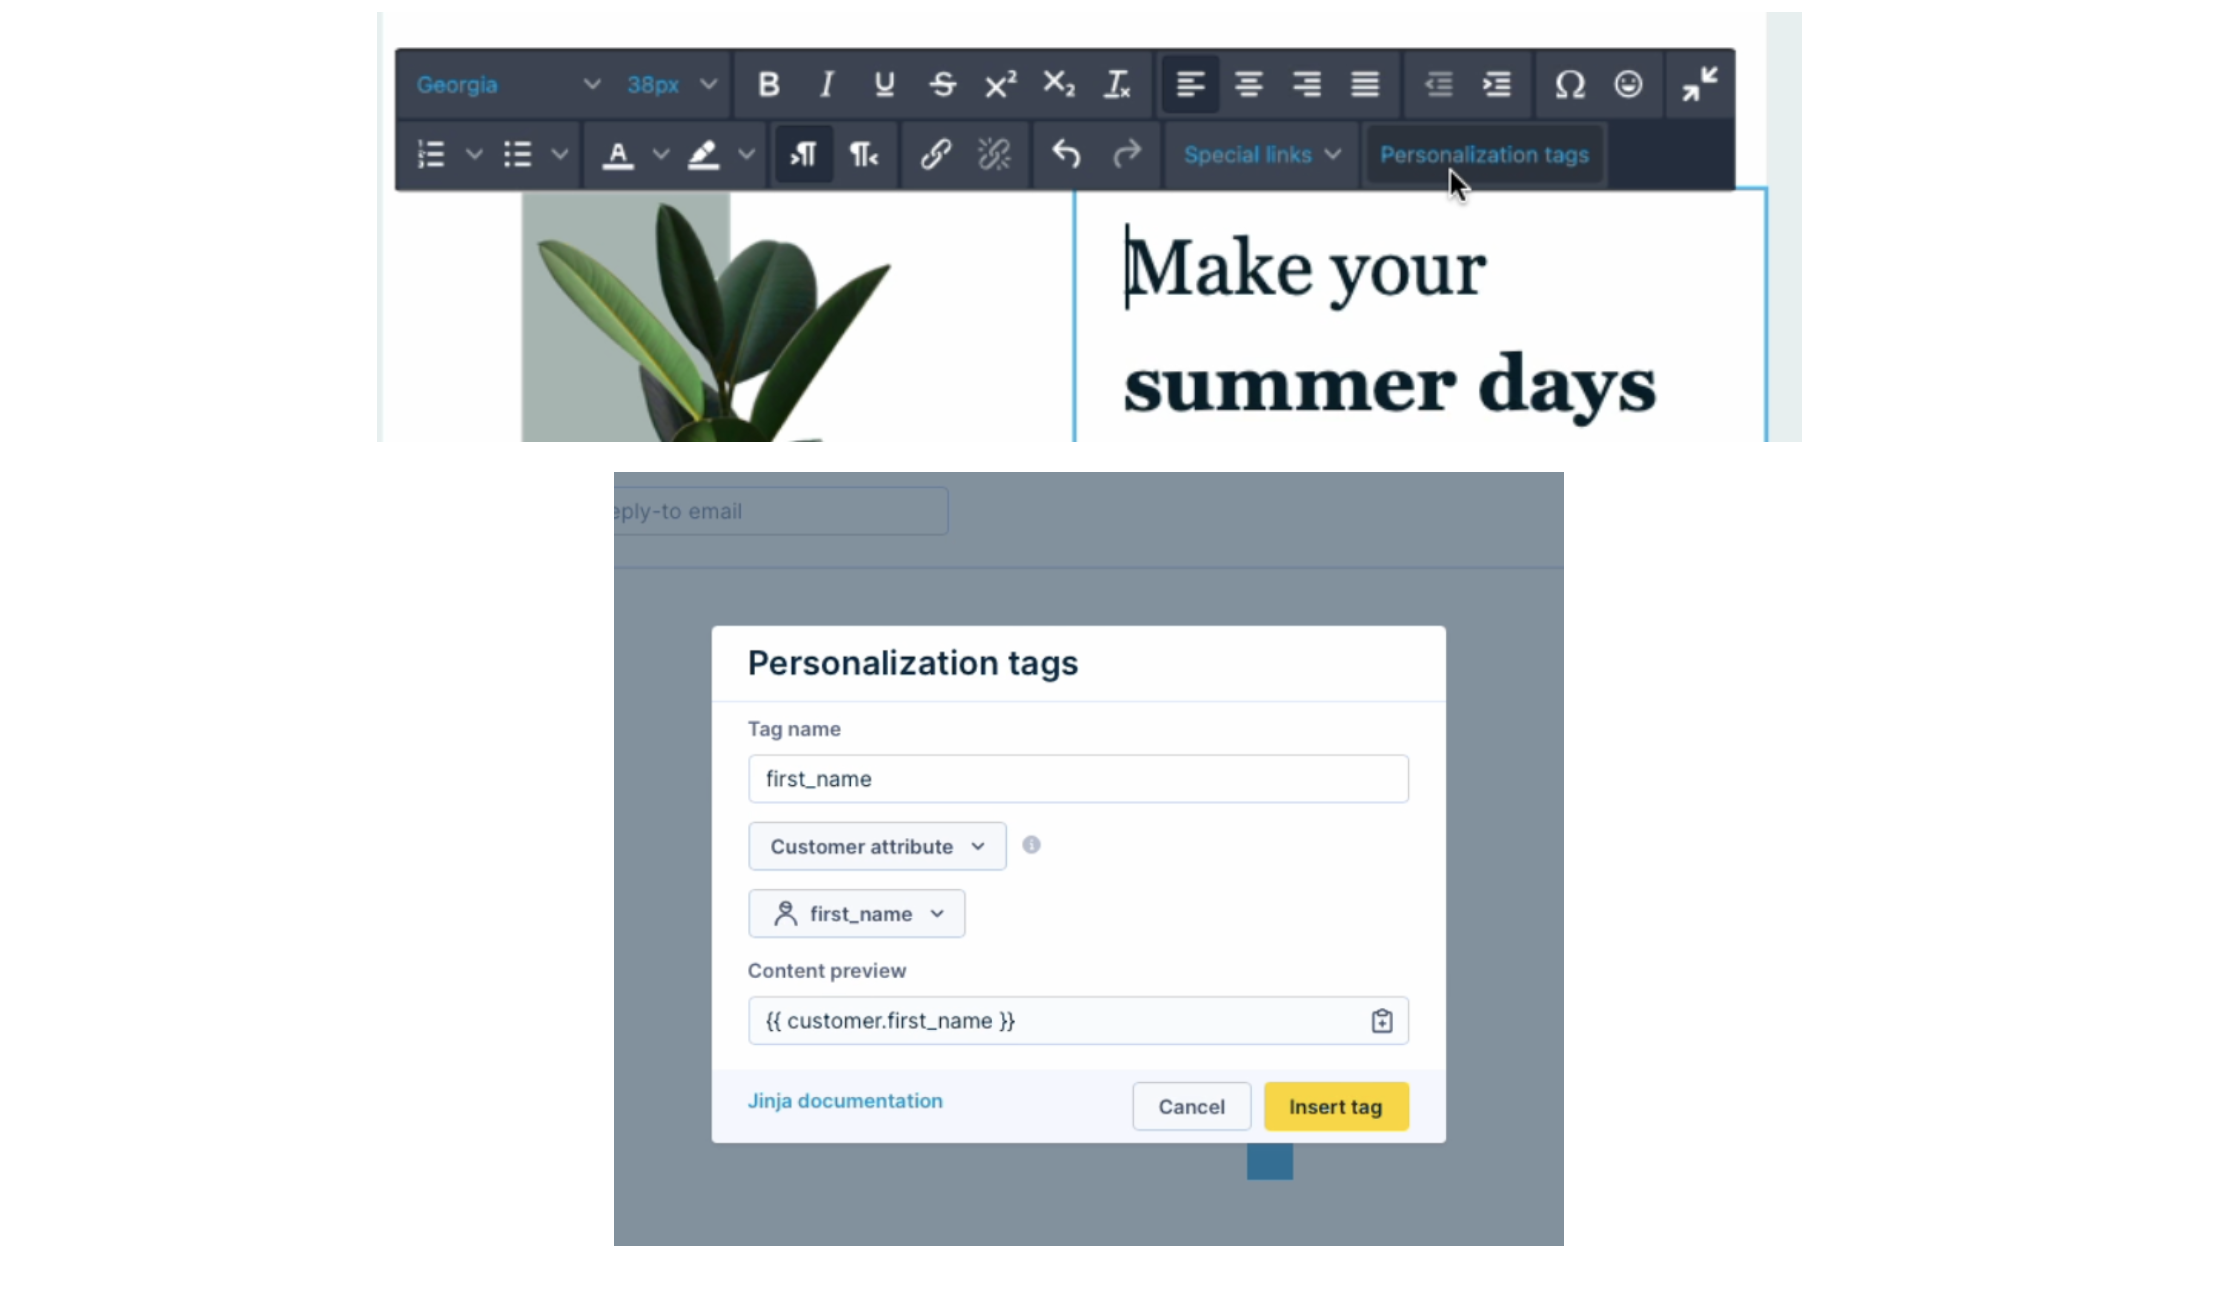 The image shows a section of an email campaign editor with a focus on the "Personalization tags" feature. It depicts a pop-up window where the user is creating a personalization tag with the label "first_name." The pop-up illustrates a dropdown menu for 'Customer attribute' with 'first_name' selected, and a field showing the personalized content preview as "{{customer.first_name}}". The interface includes a button for inserting the tag into the email, indicating a functionality that allows users to insert dynamic content, such as the recipient's first name, into email campaigns for a personalized touch. There is also a link to Jinja documentation, suggesting that the system uses the Jinja template language. The background suggests the email's visual editor, with a banner headline that reads "Make your summer days" indicating a summery theme for the email being composed.